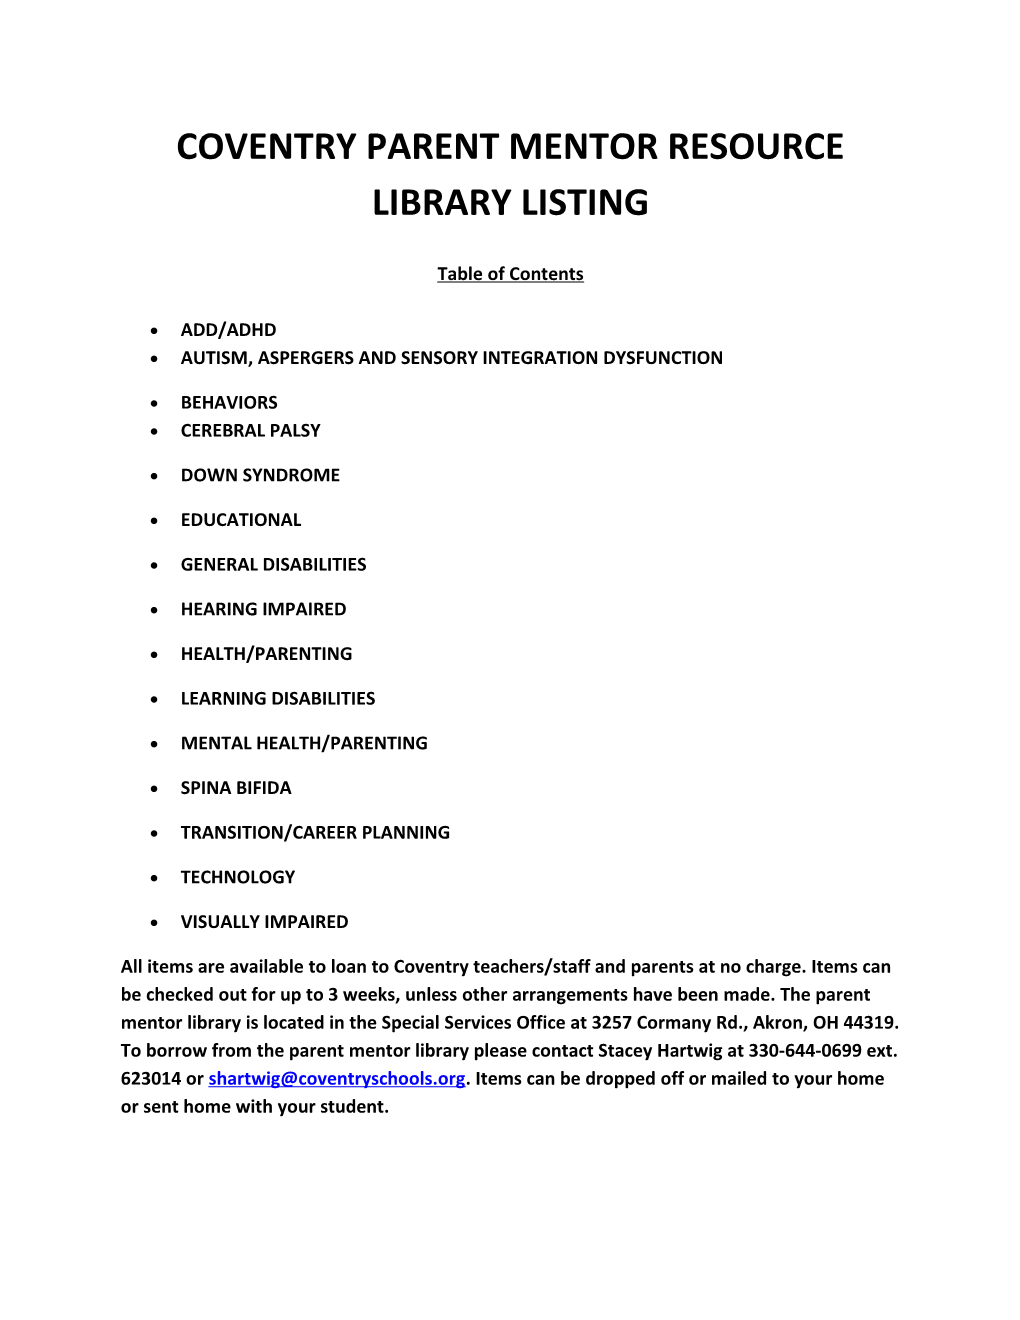 Coventry Parent Mentor Resource Library Listing